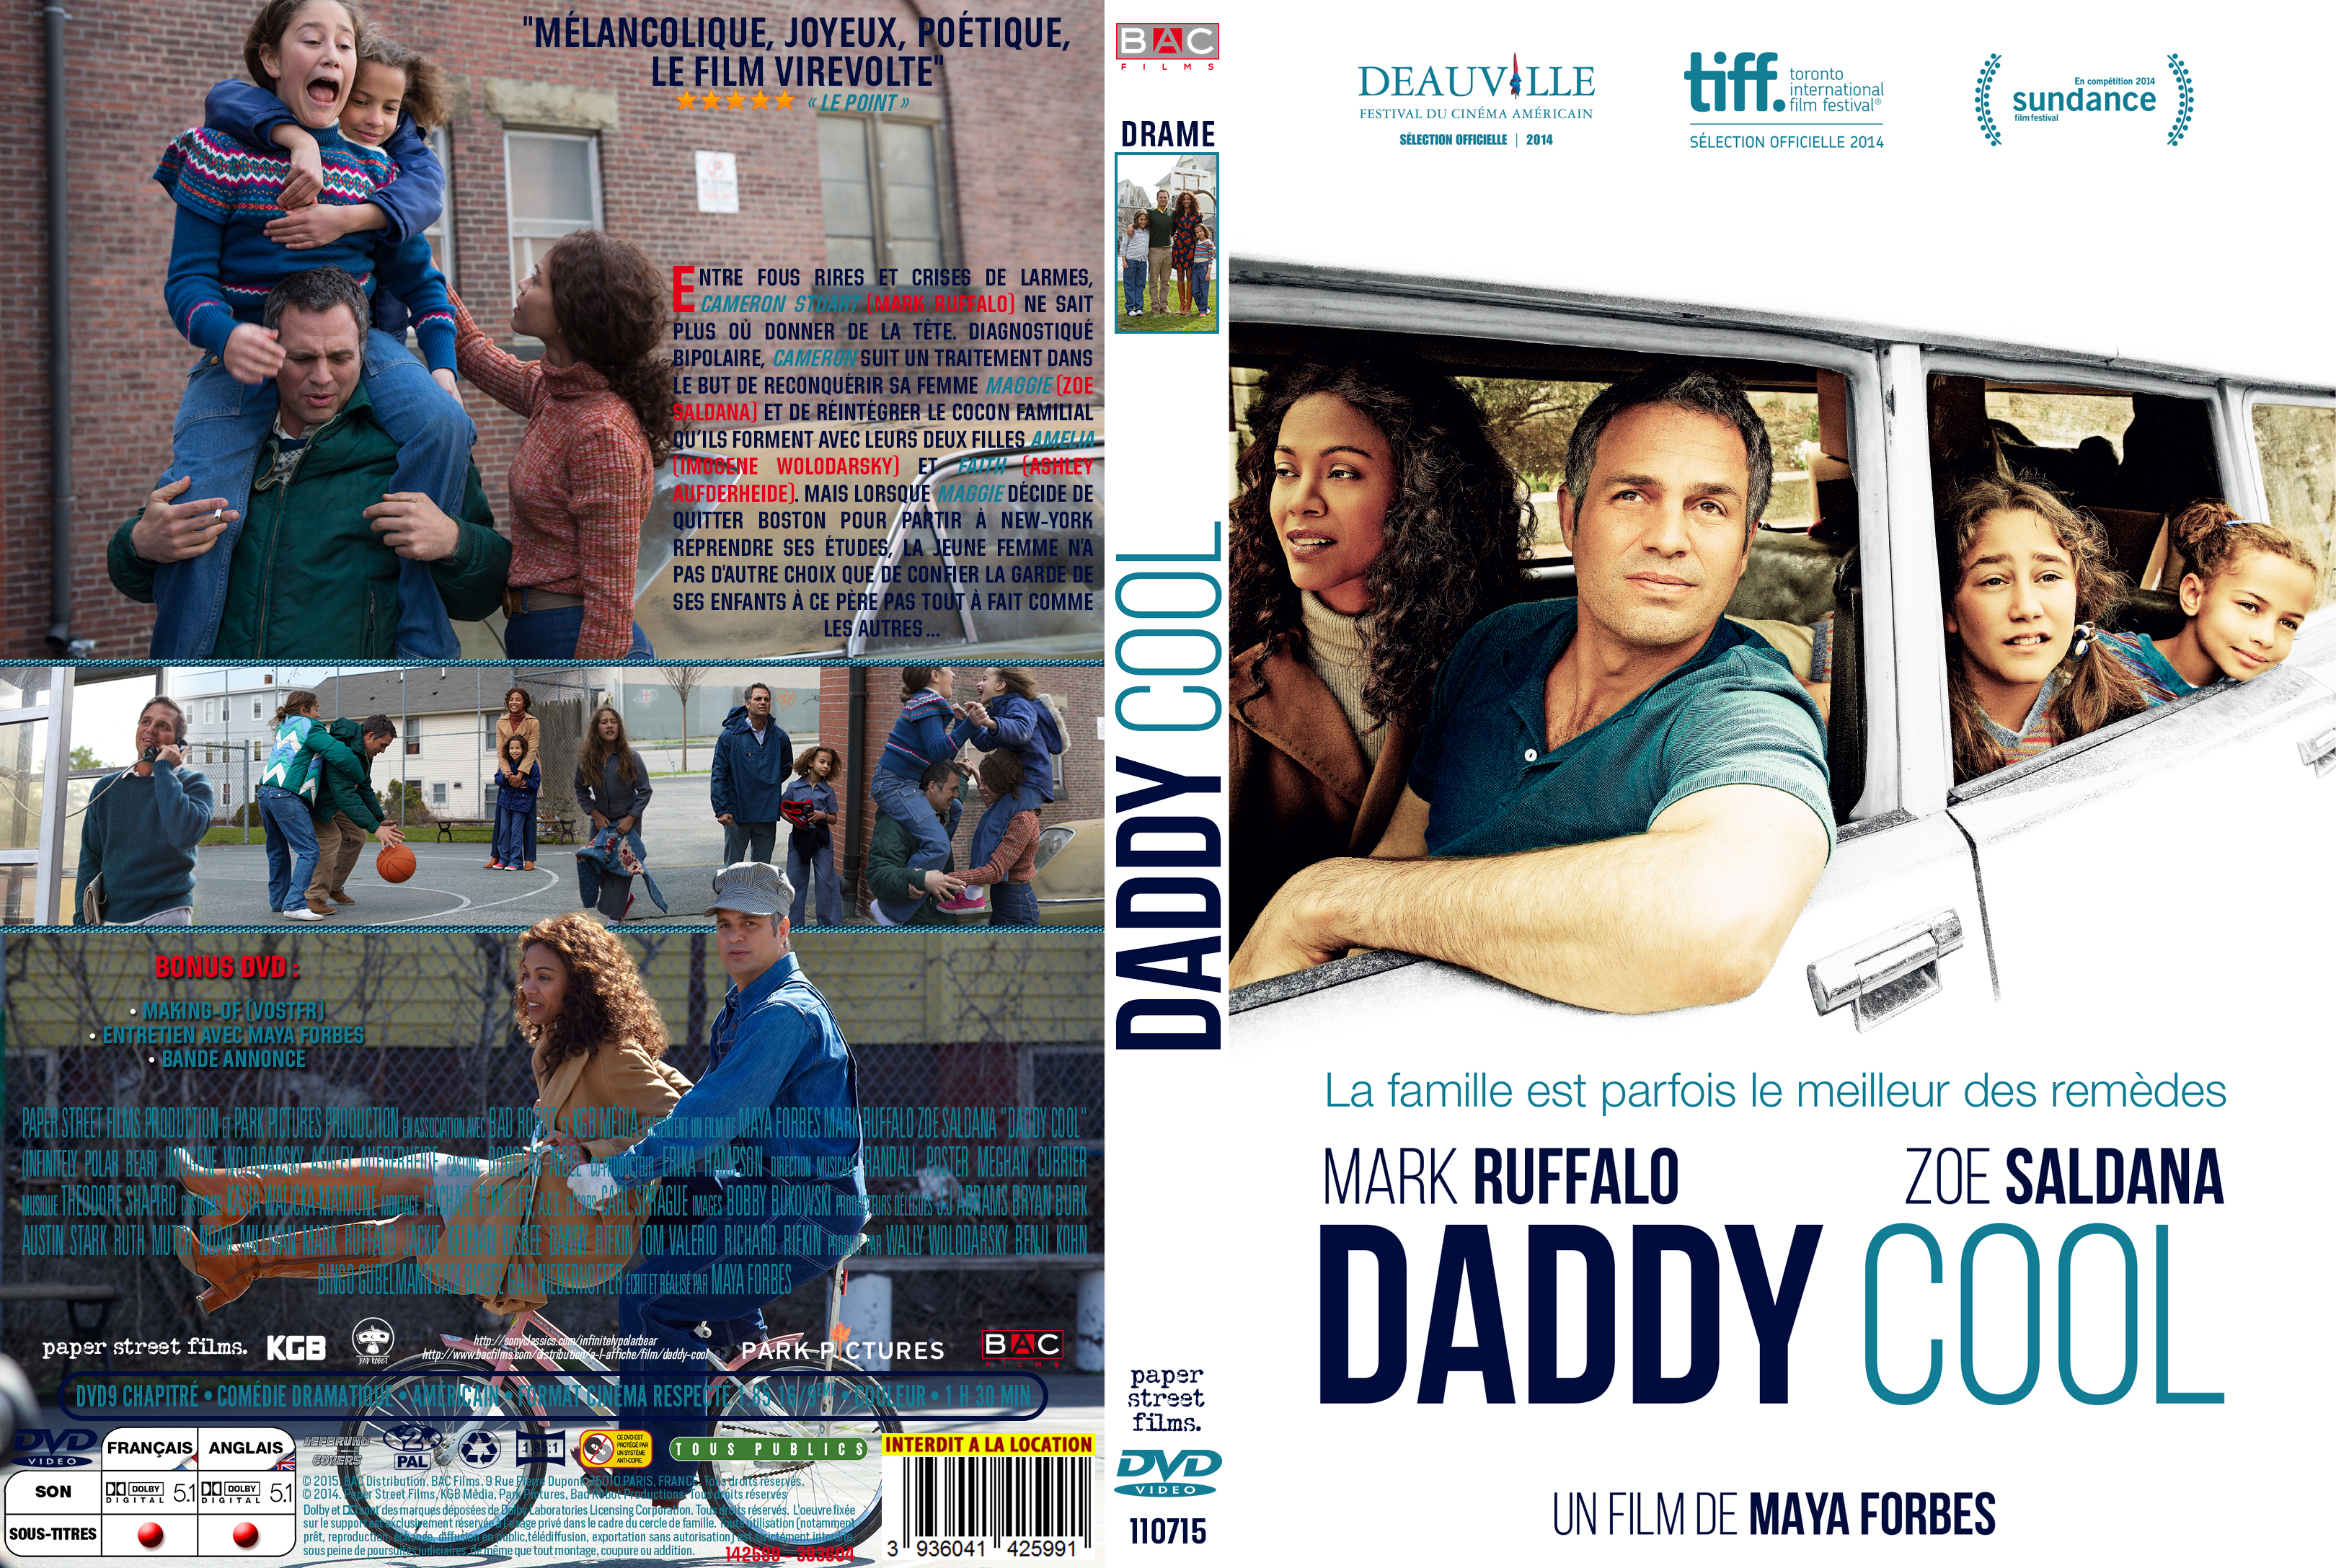 Jaquette DVD Daddy Cool custom